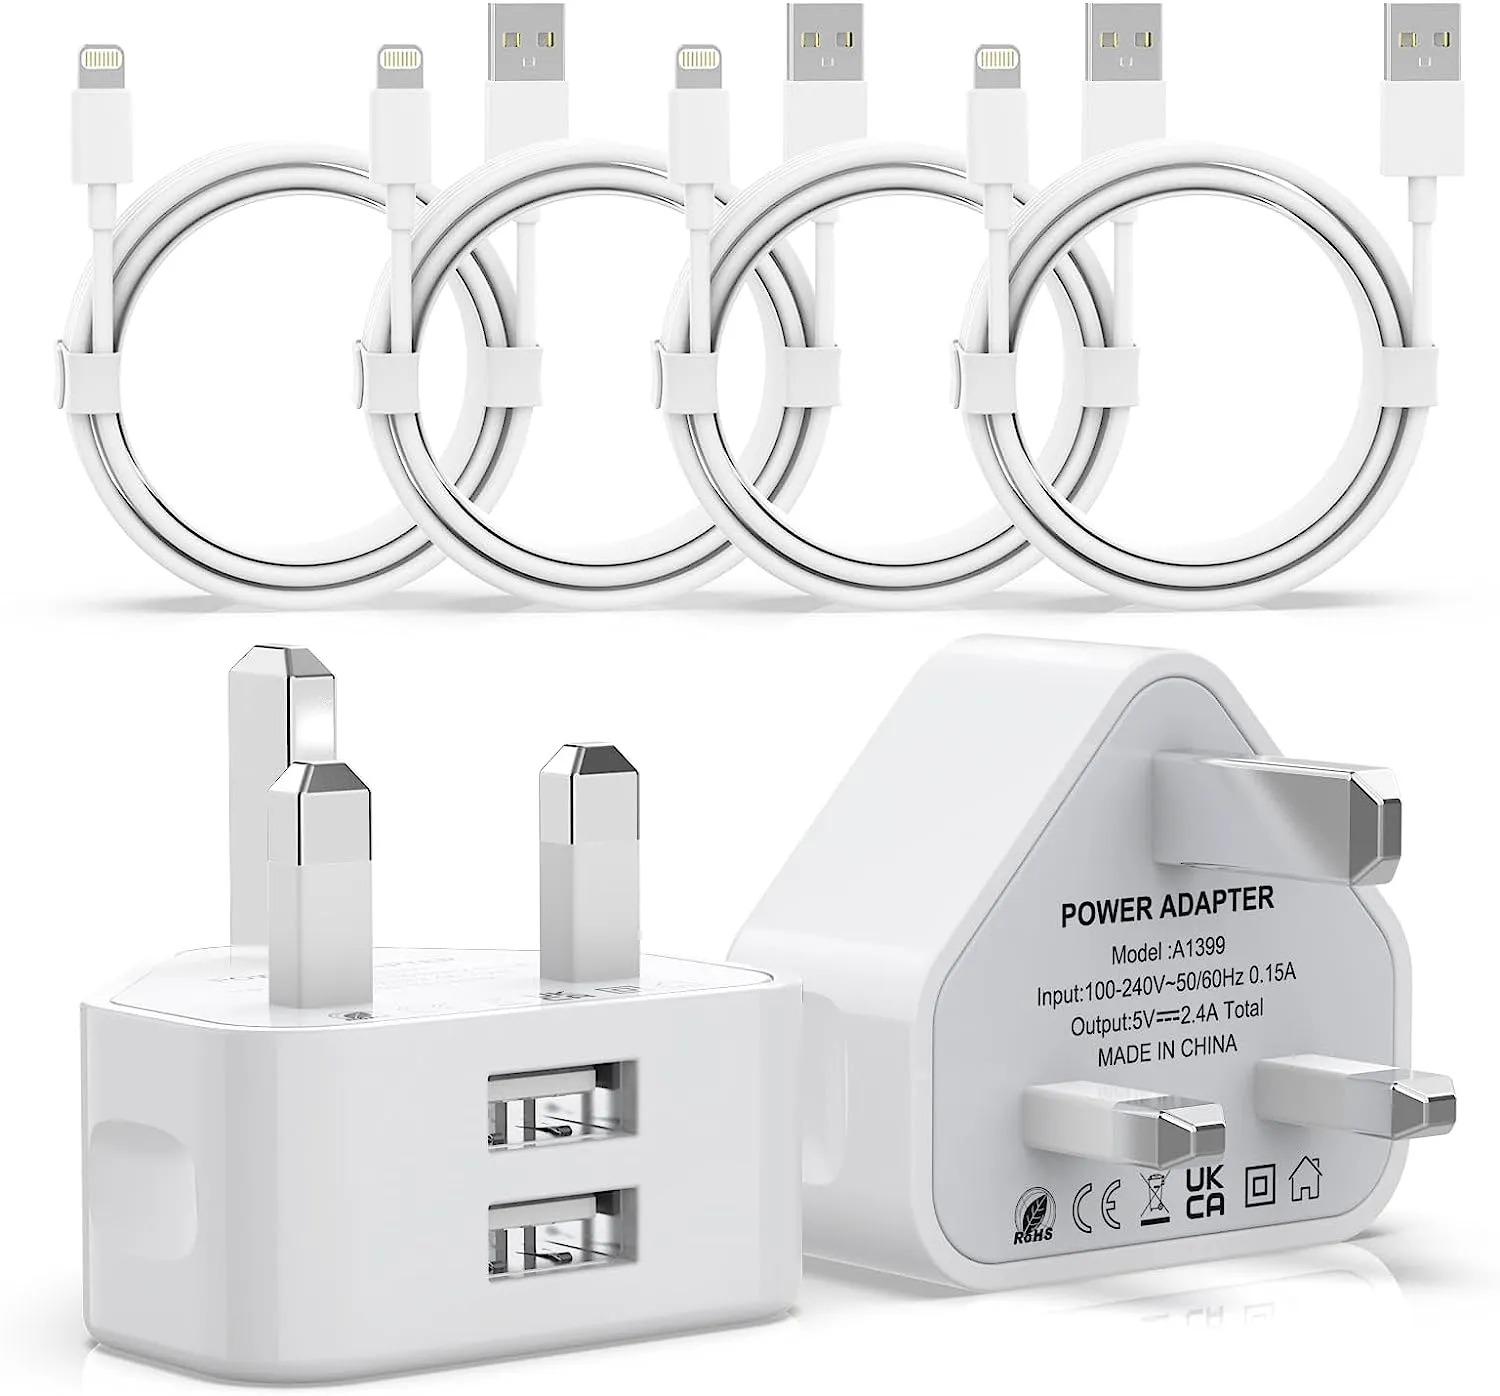 Dual USB Plug UK Mains Charger for iPhone